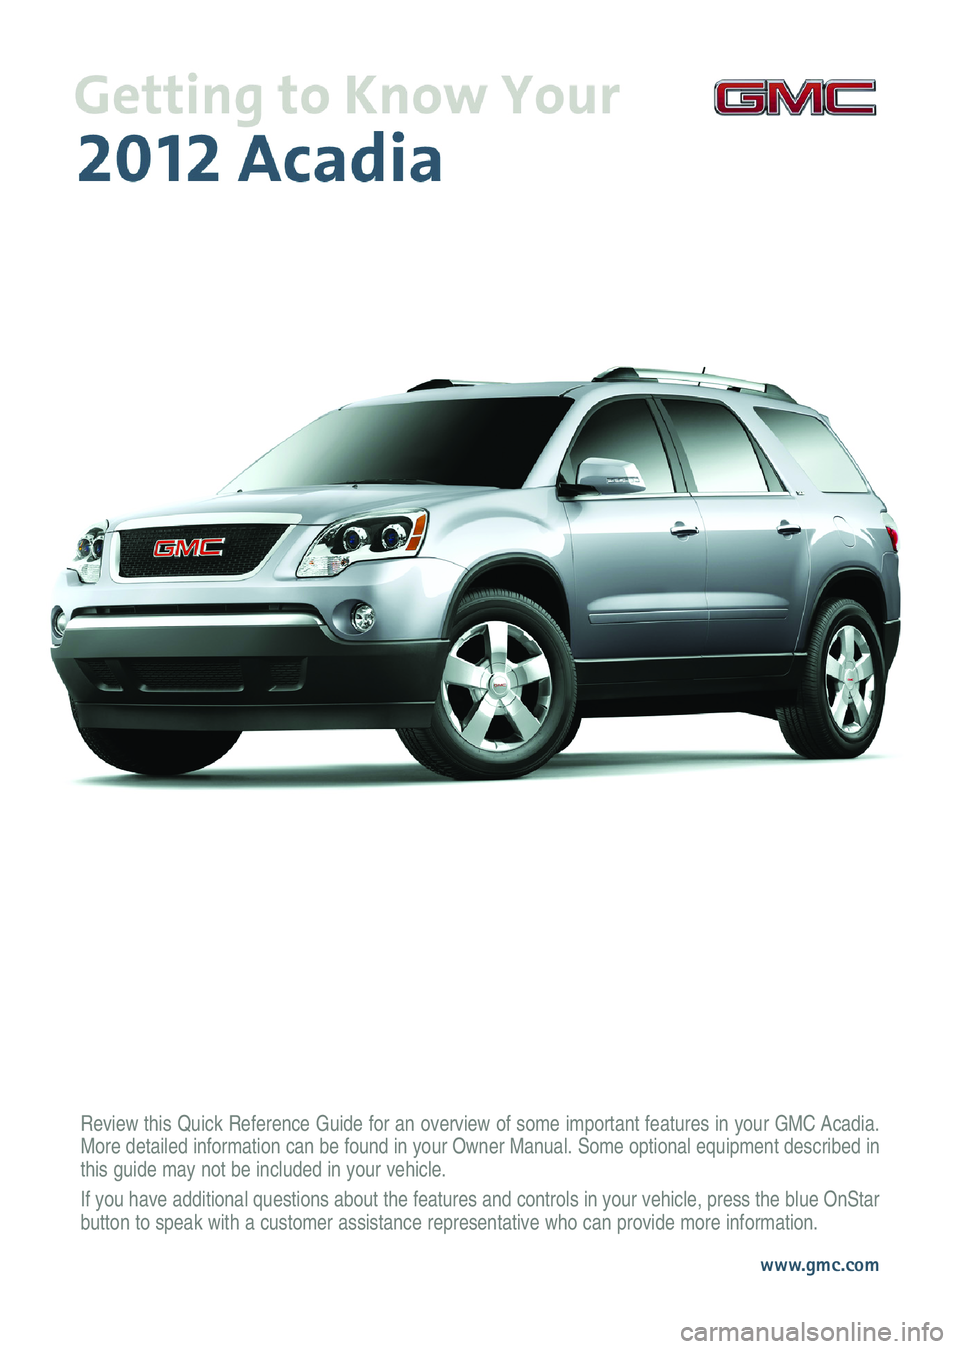 GMC ACADIA 2012  Get To Know Guide 